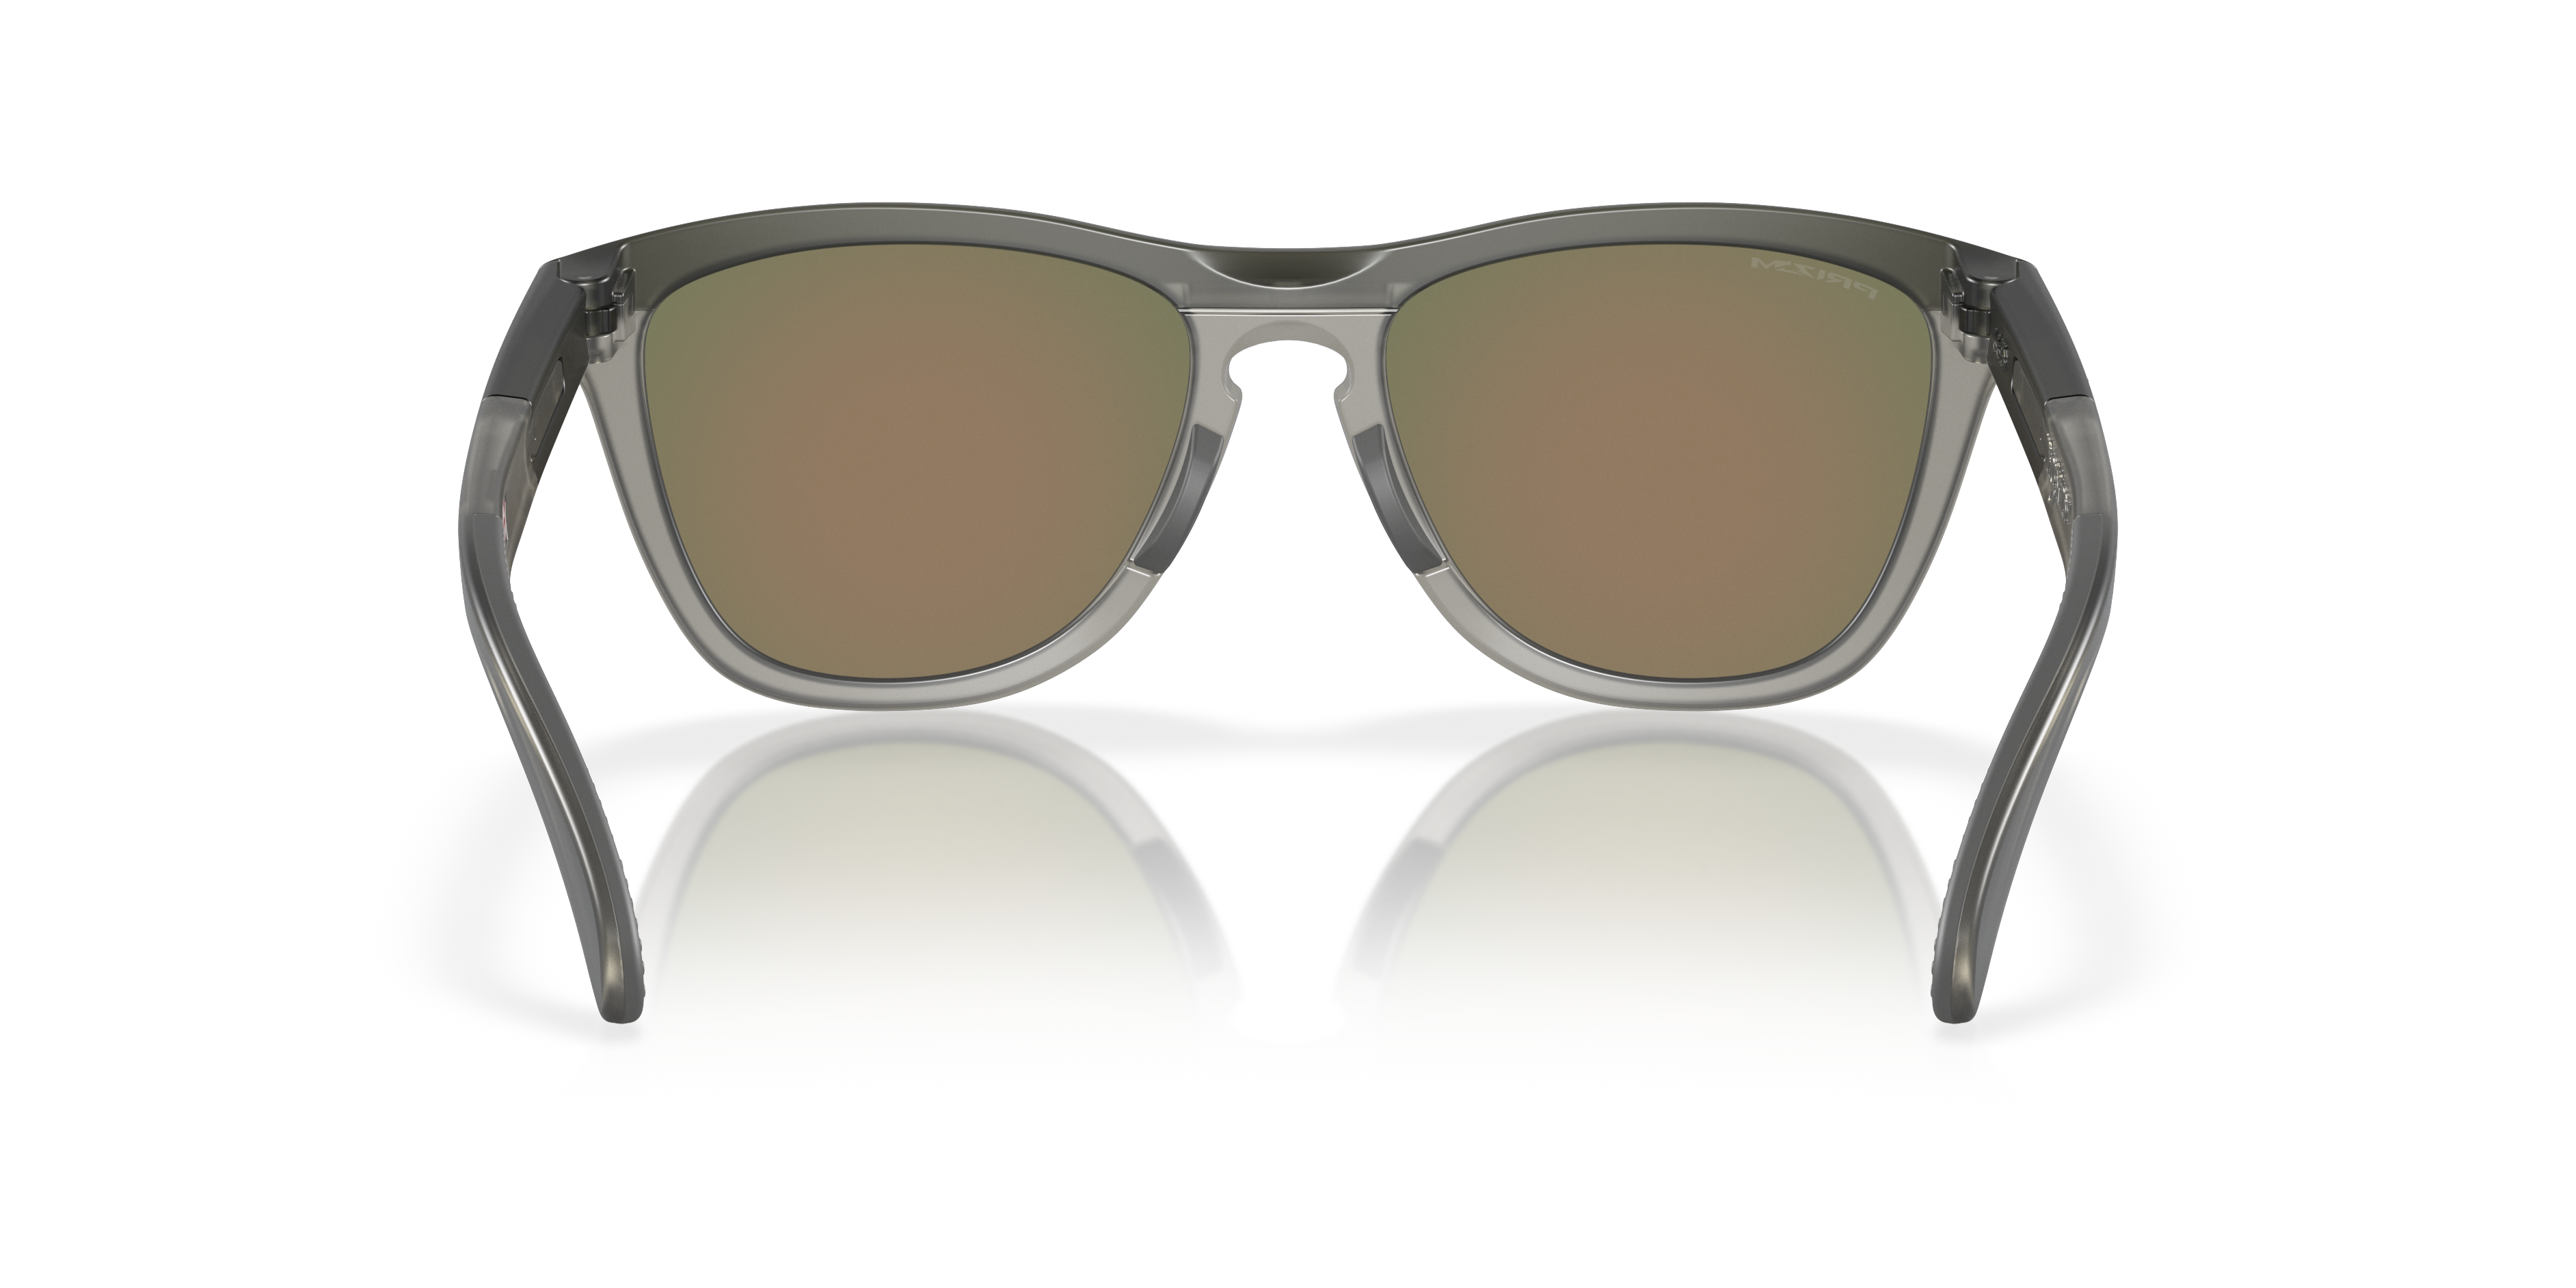 [products.image.detail02] Oakley Frogskins Range 0OO9284 928401